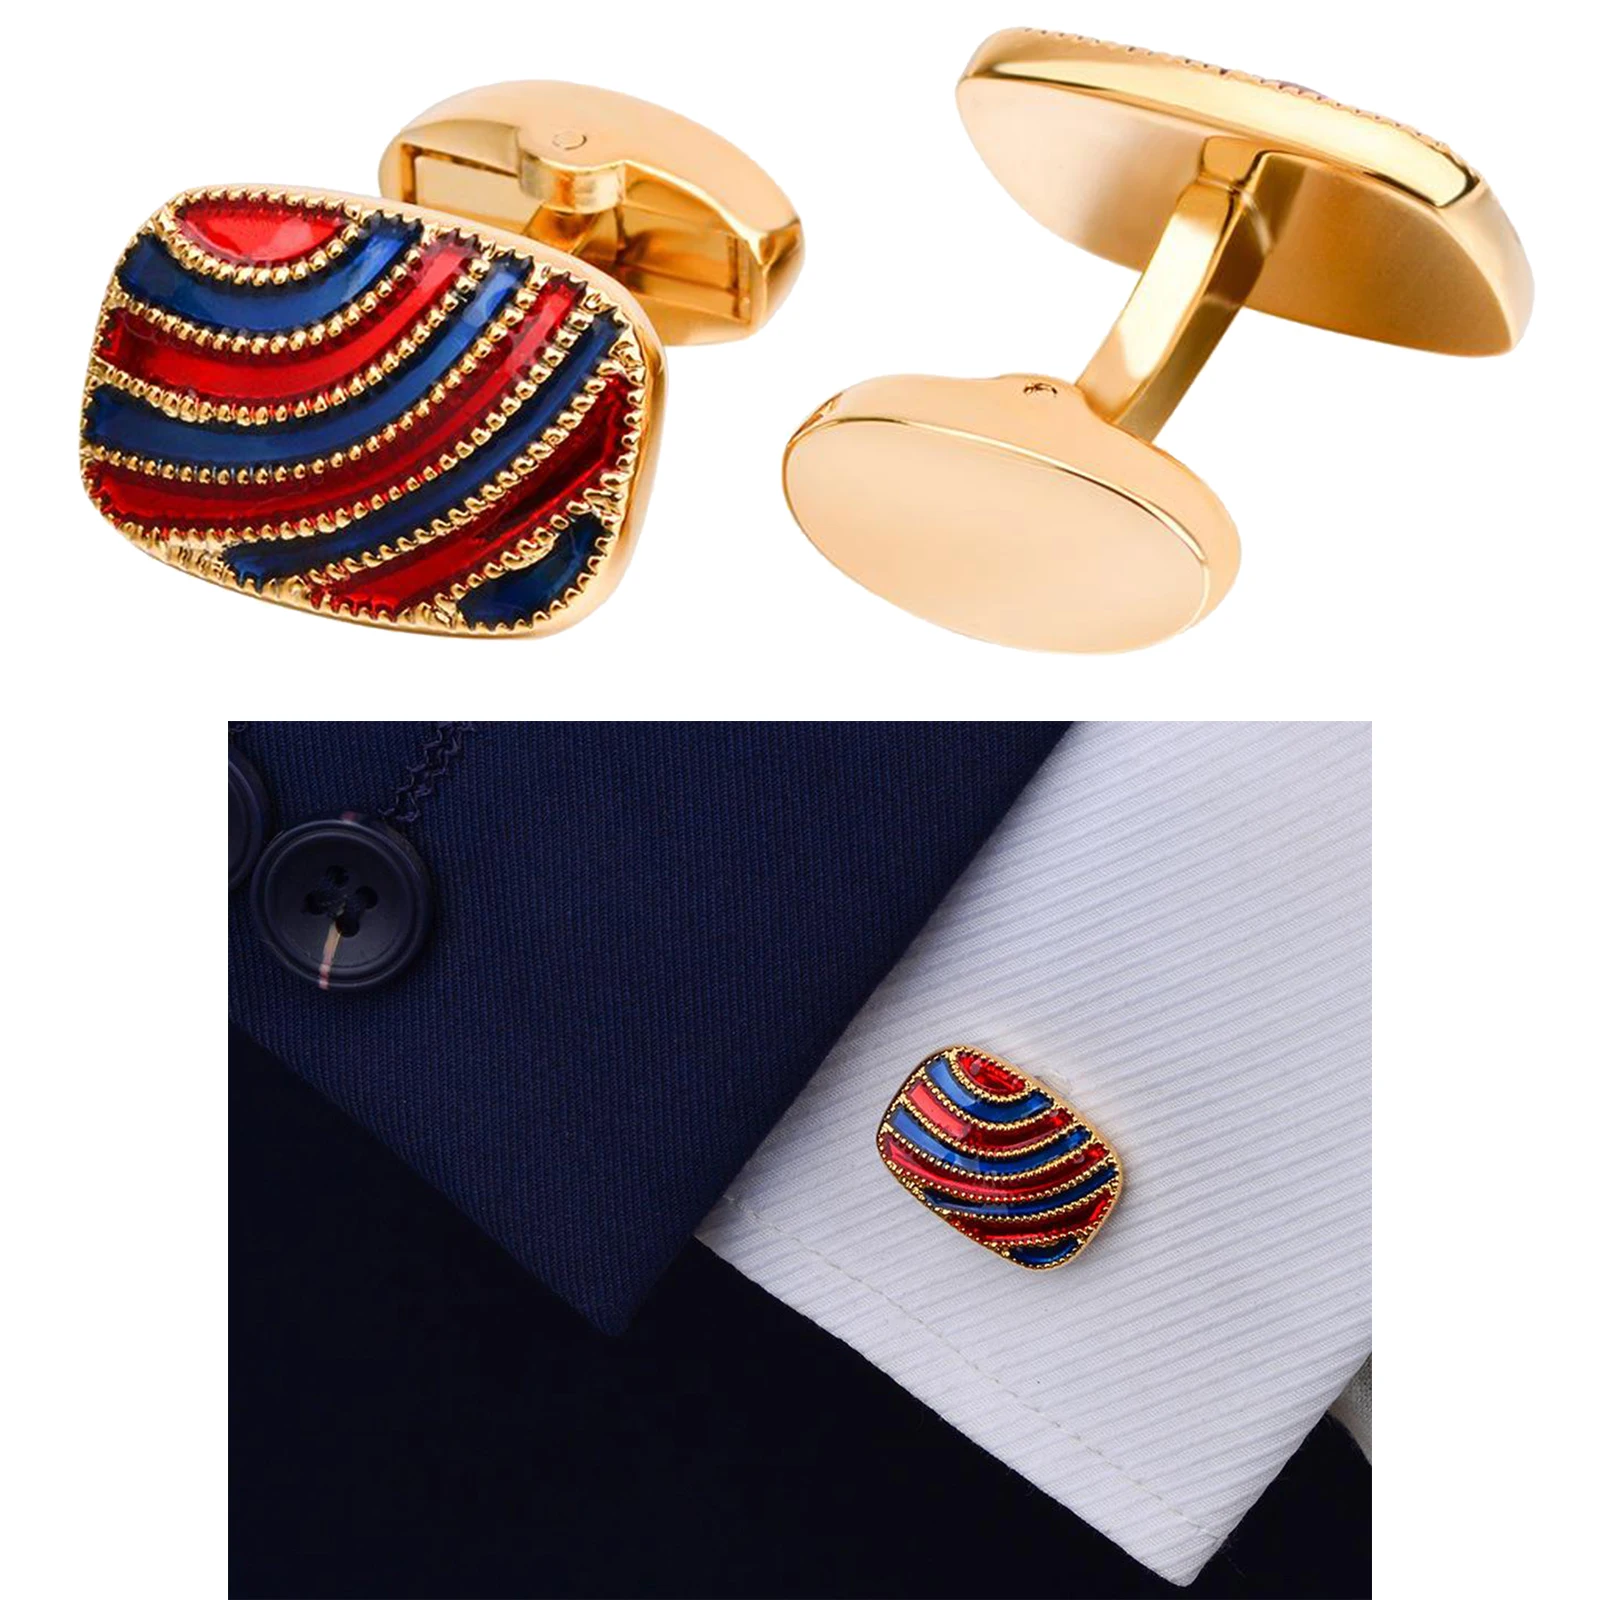 2 Packs Cuff Links Cuff Men's Shirts Jewelry Gift for Suits Uniform Jacket